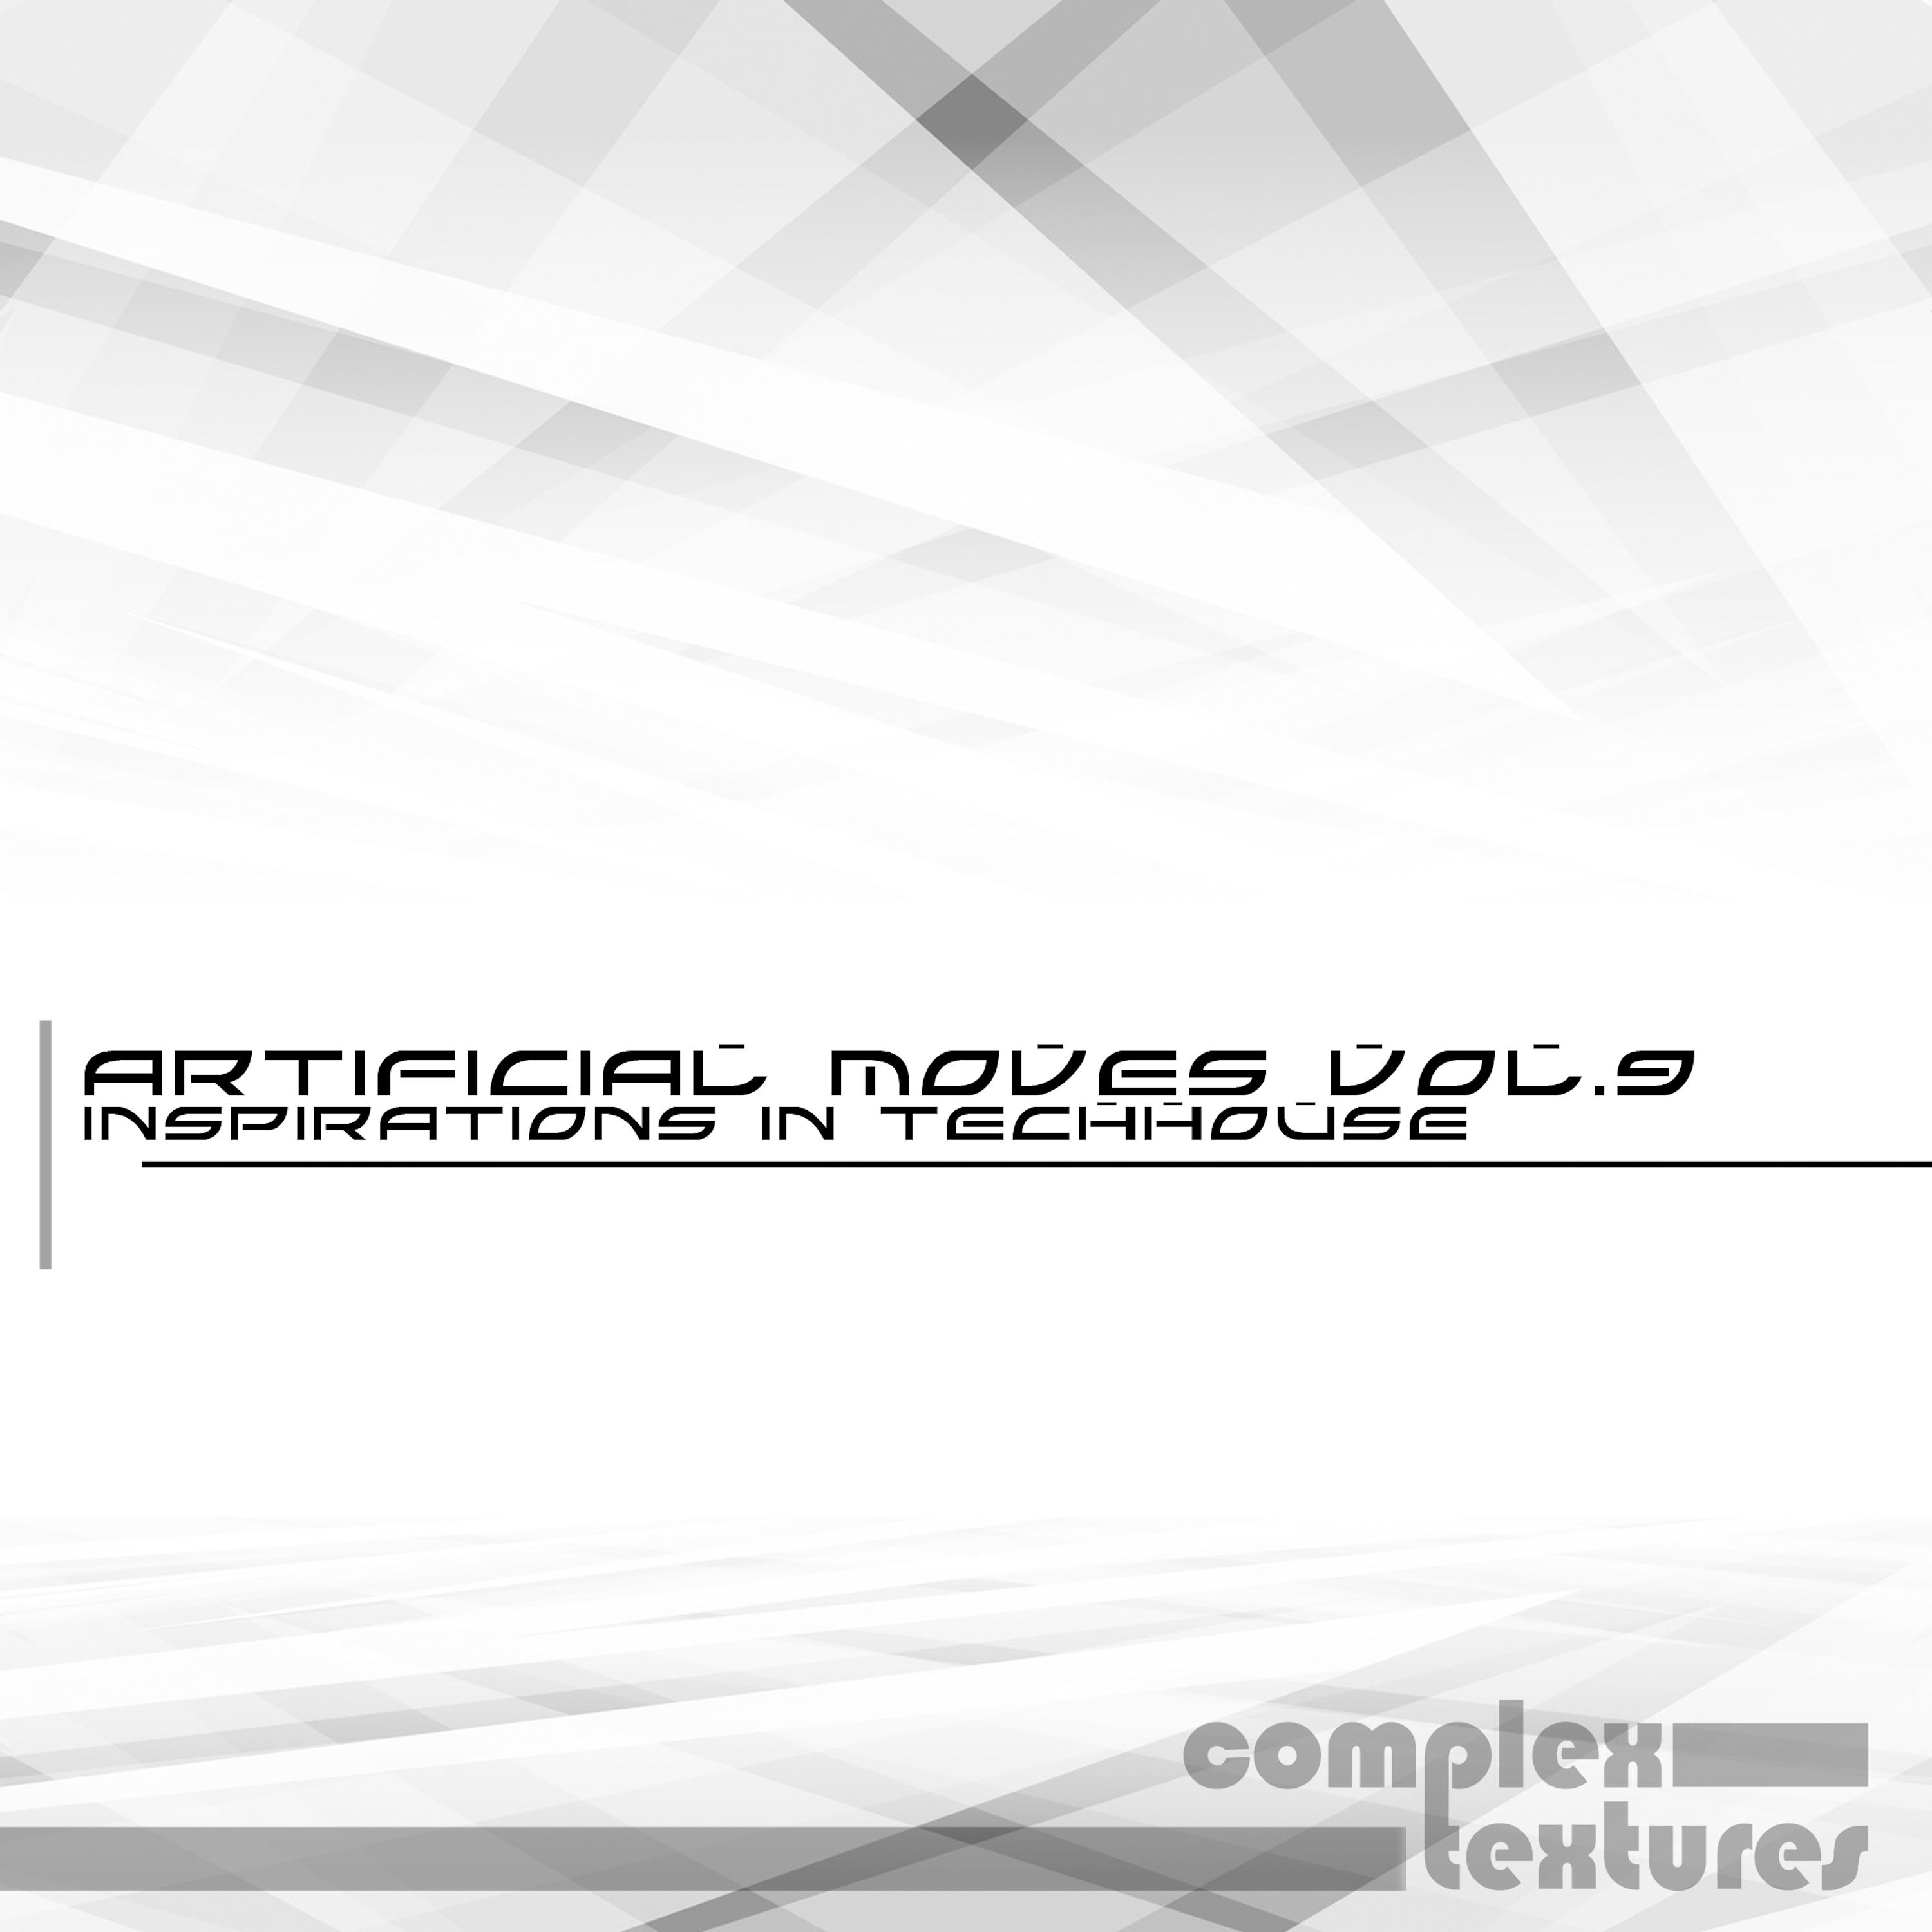 Artificial Moves, Vol. 9 - Inspirations in Techhouse